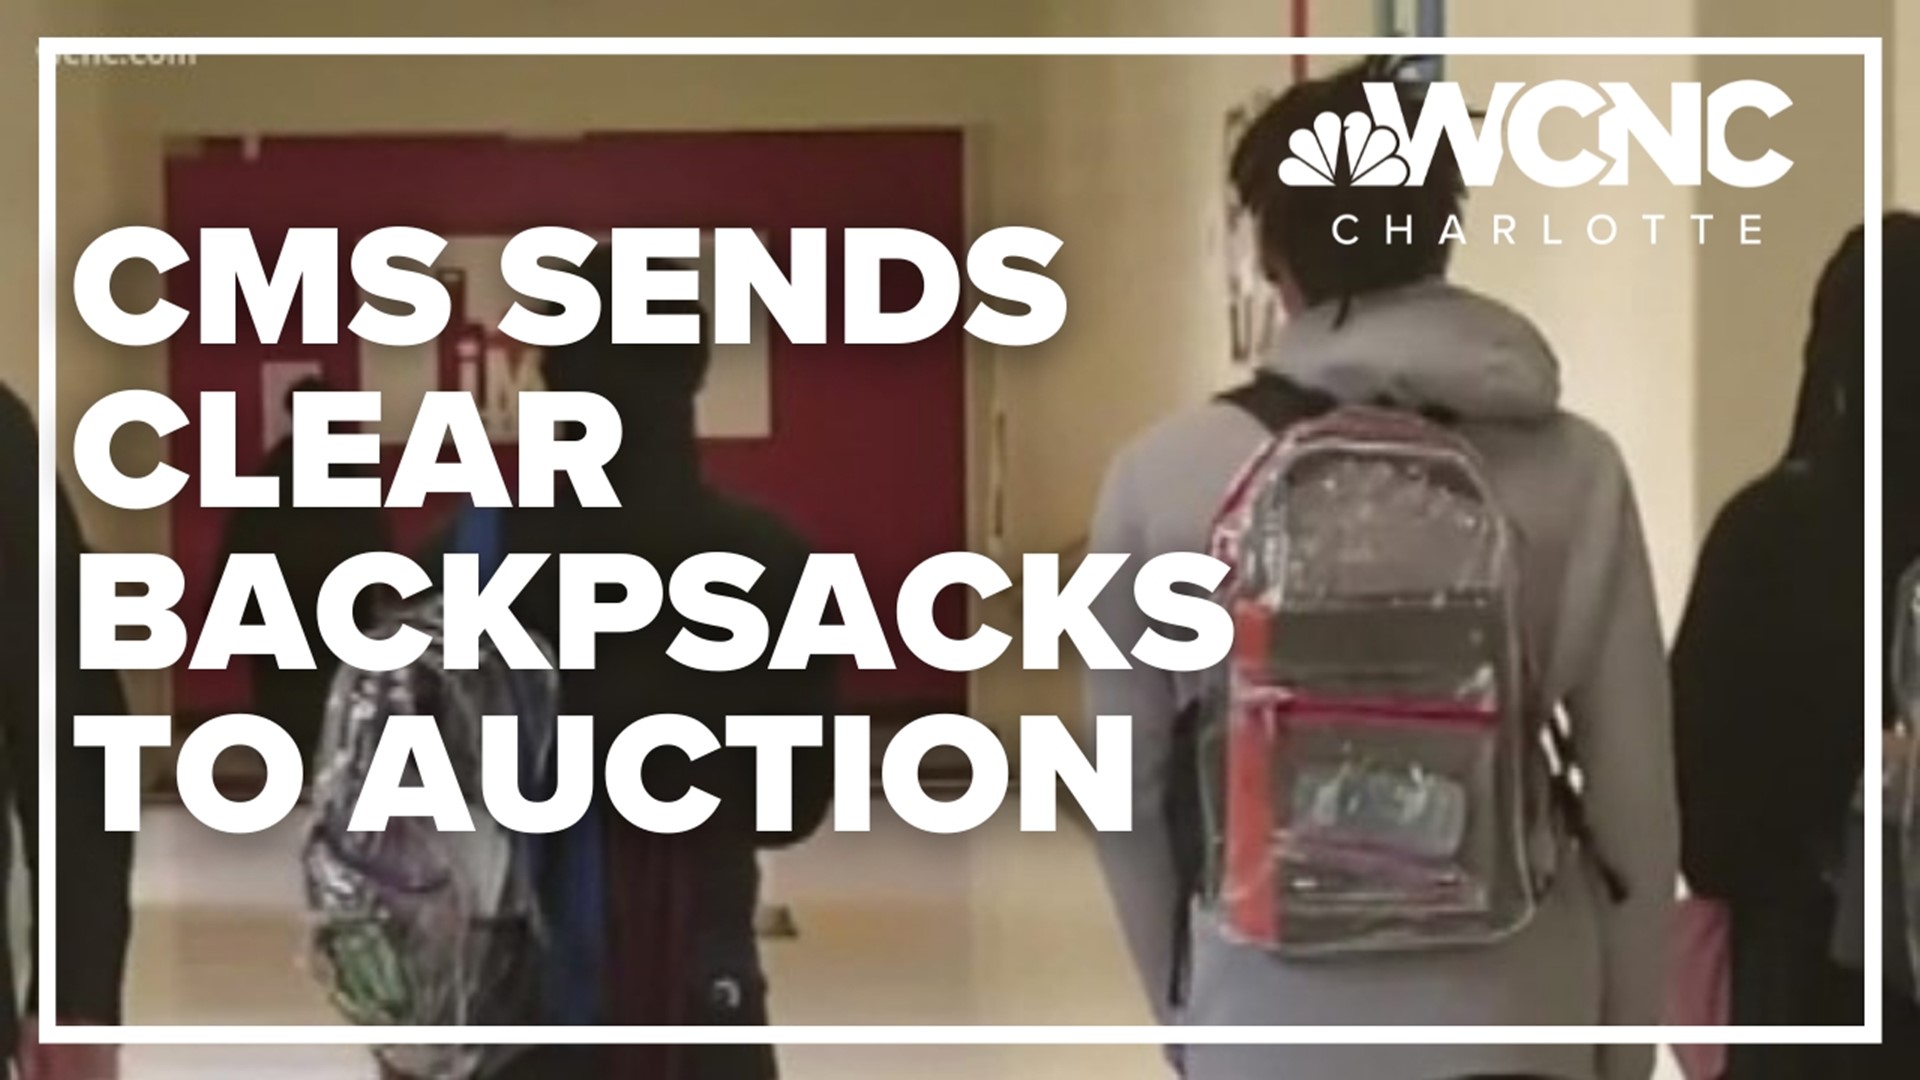 CMS decided to auction the backpacks, which have a Proposition 65 warning in California. The district invested nearly $500,000 in the bags.